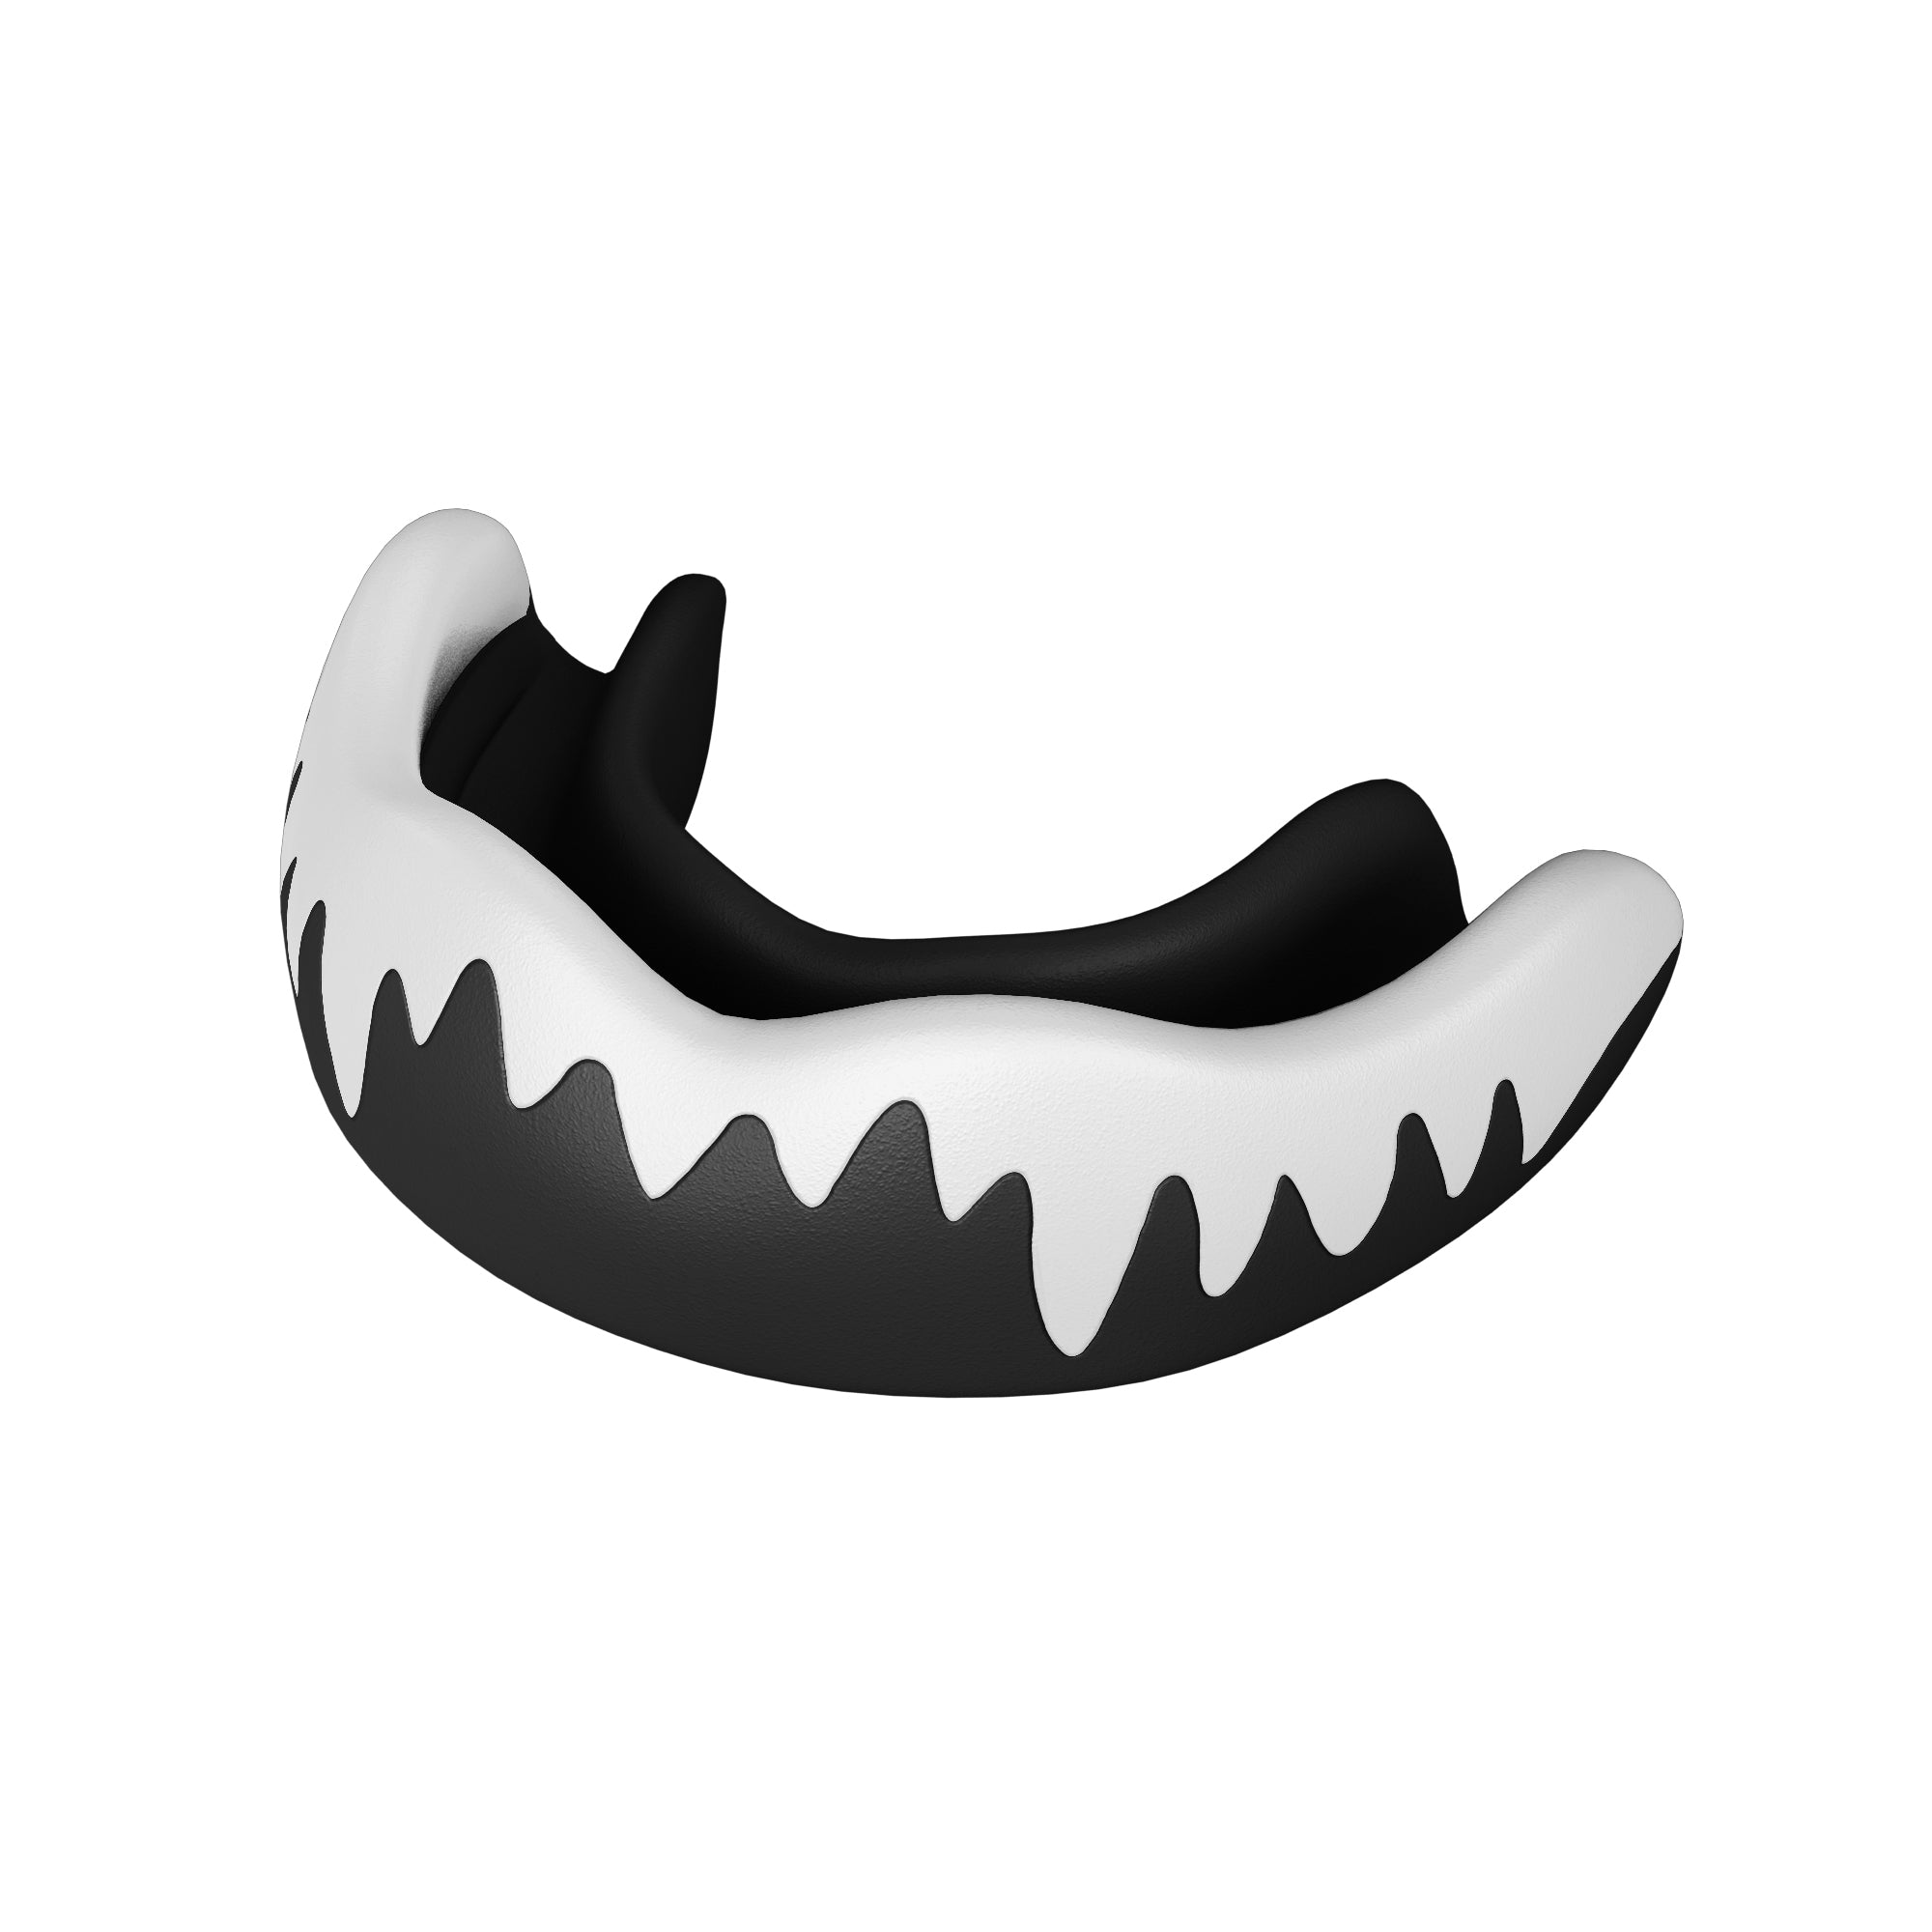 ’Piranha’ Adult’s Gum Shield for boxing rugby MMA BJJ - 